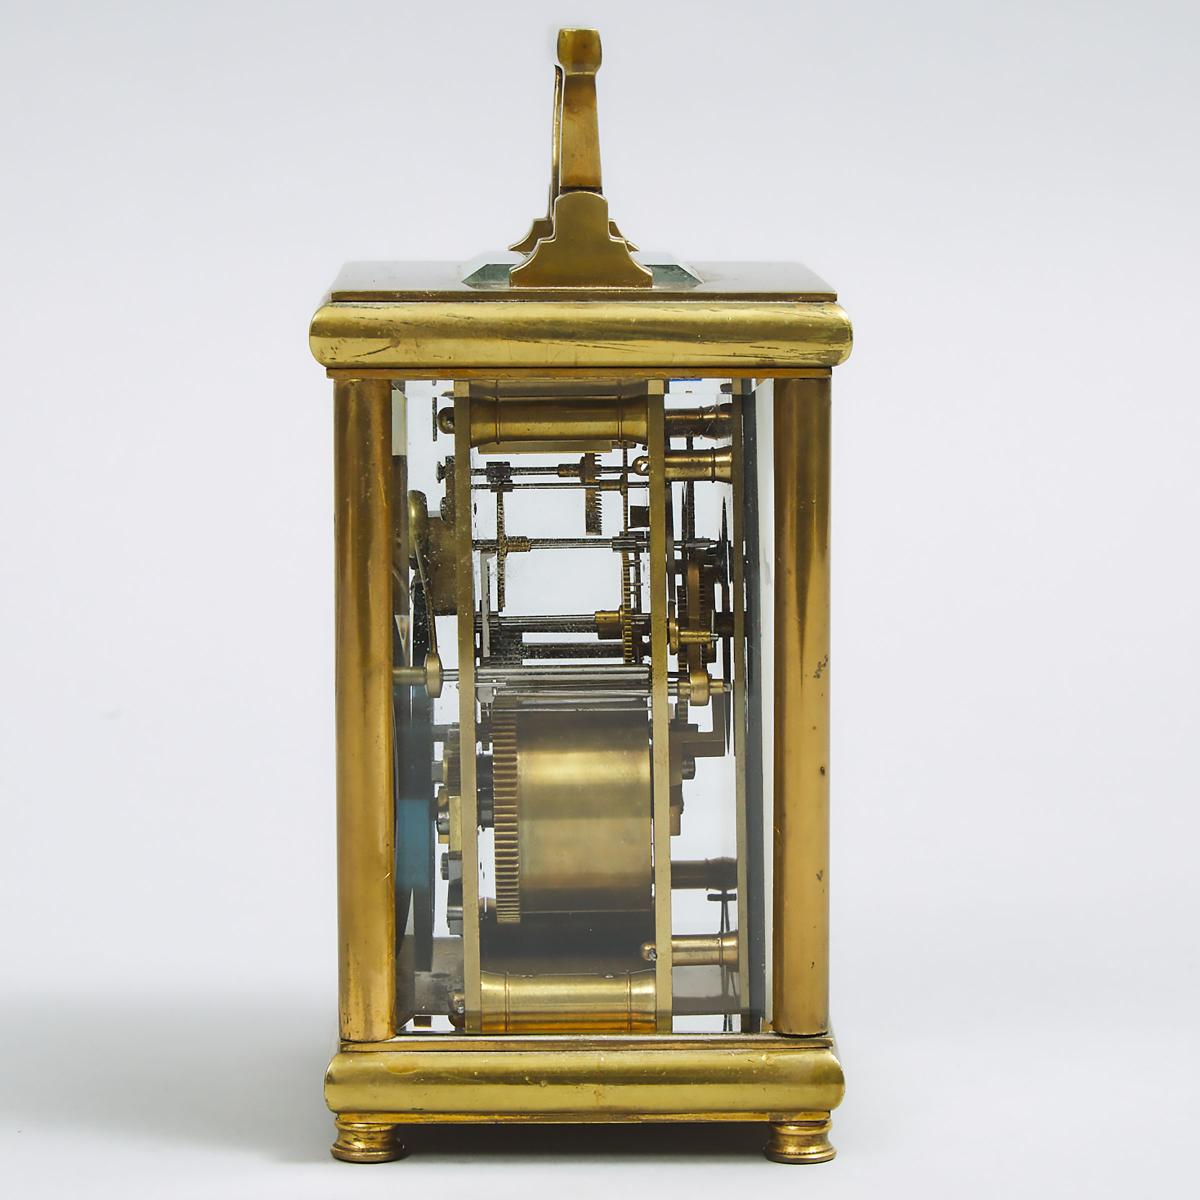 French Carriage Clock, c.1900, handle up height 6.75 in — 17.1 cm - Image 2 of 3